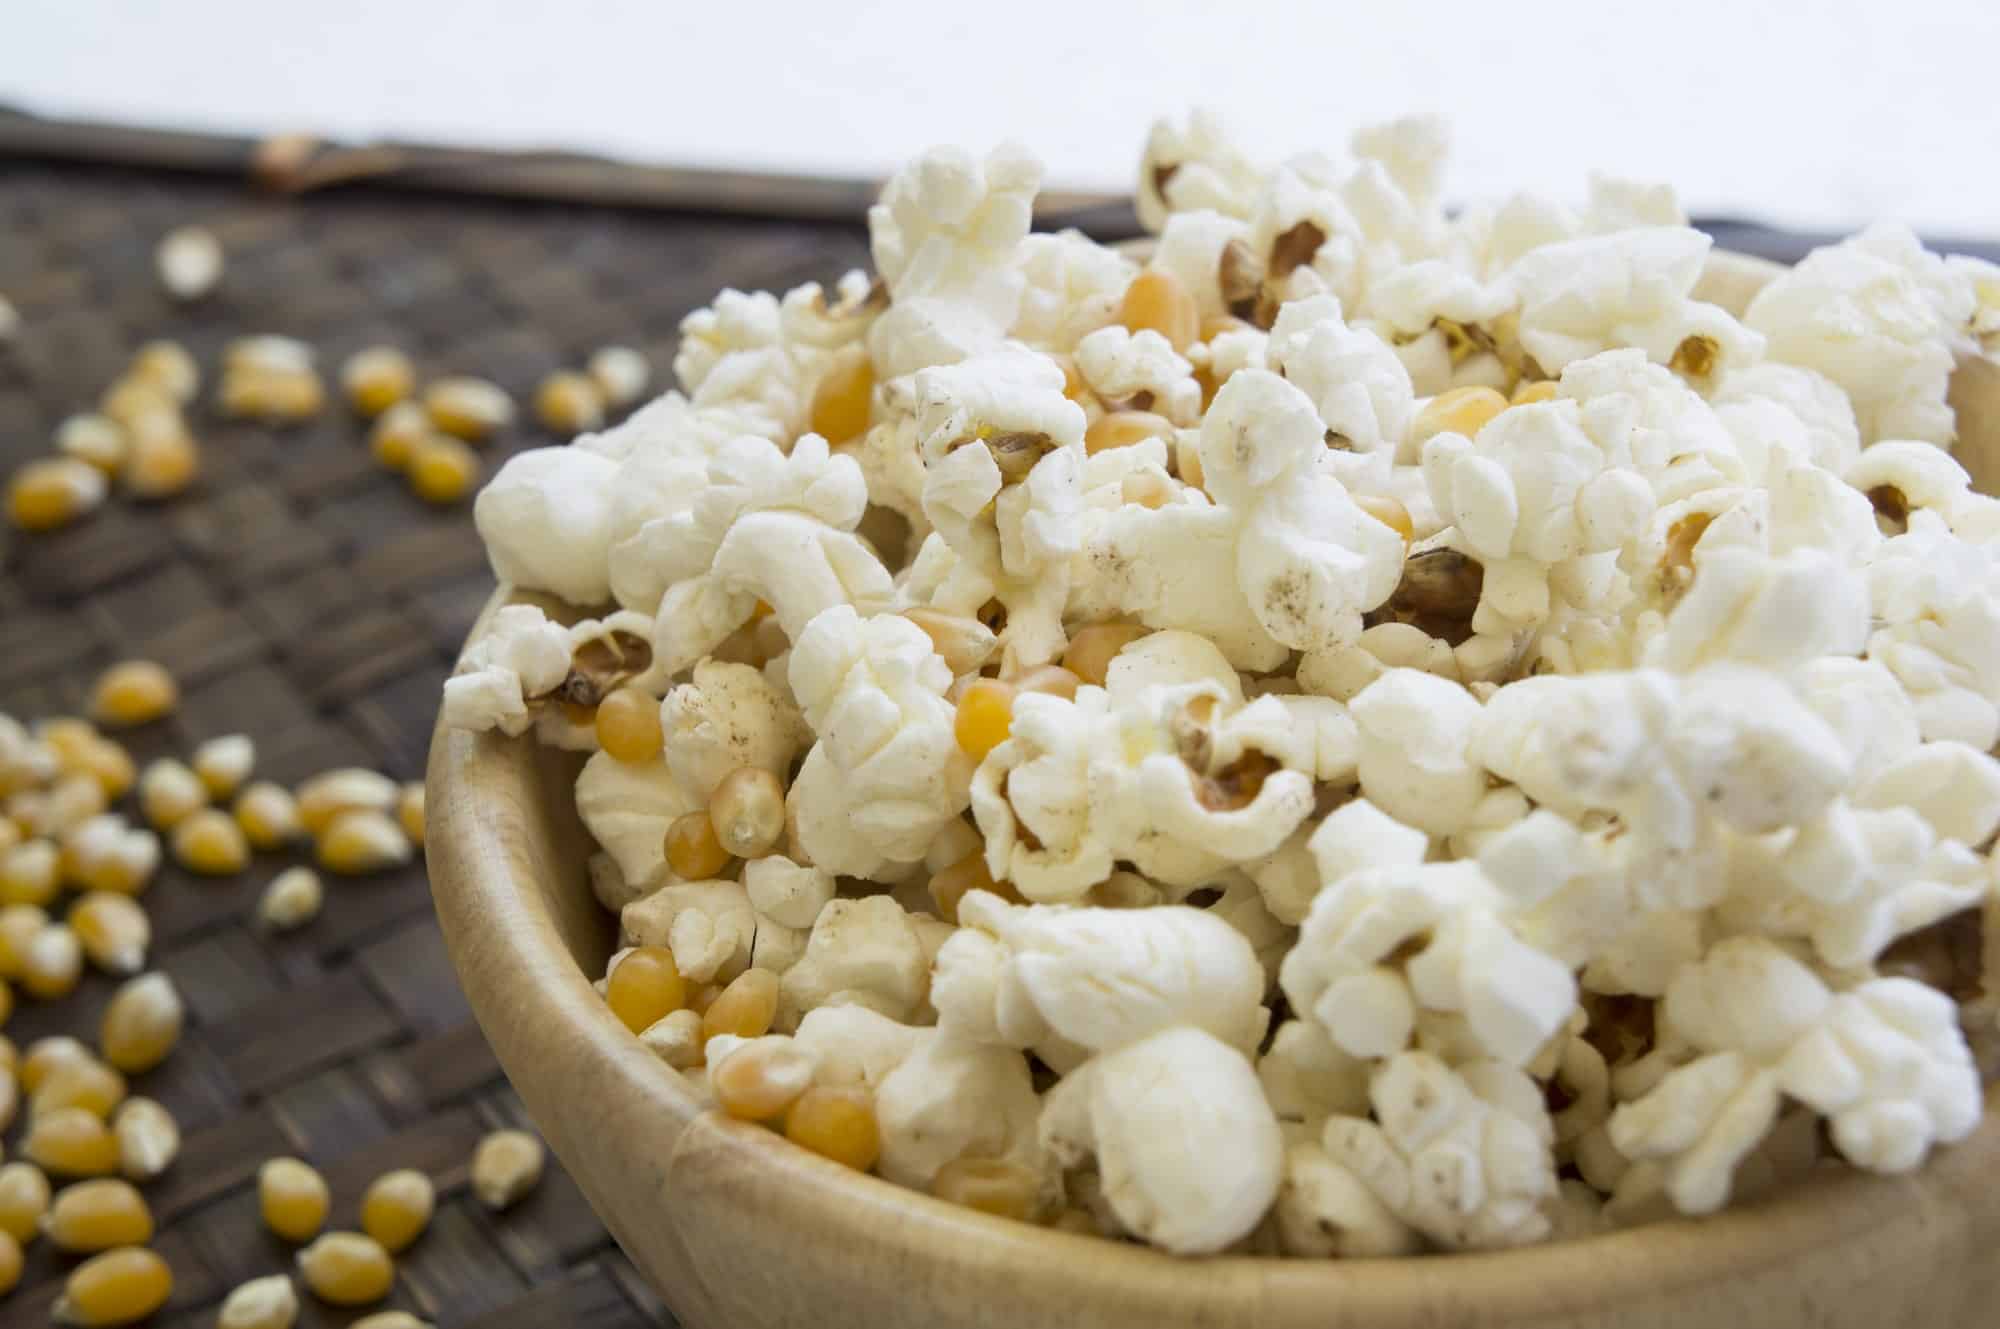 making homemade popcorn in an inexpensive air popper is fast and much healthier than microwave popcorn. Get our recipe and more helpful tips at Made in a Pinch and follow us on Pinterest!2